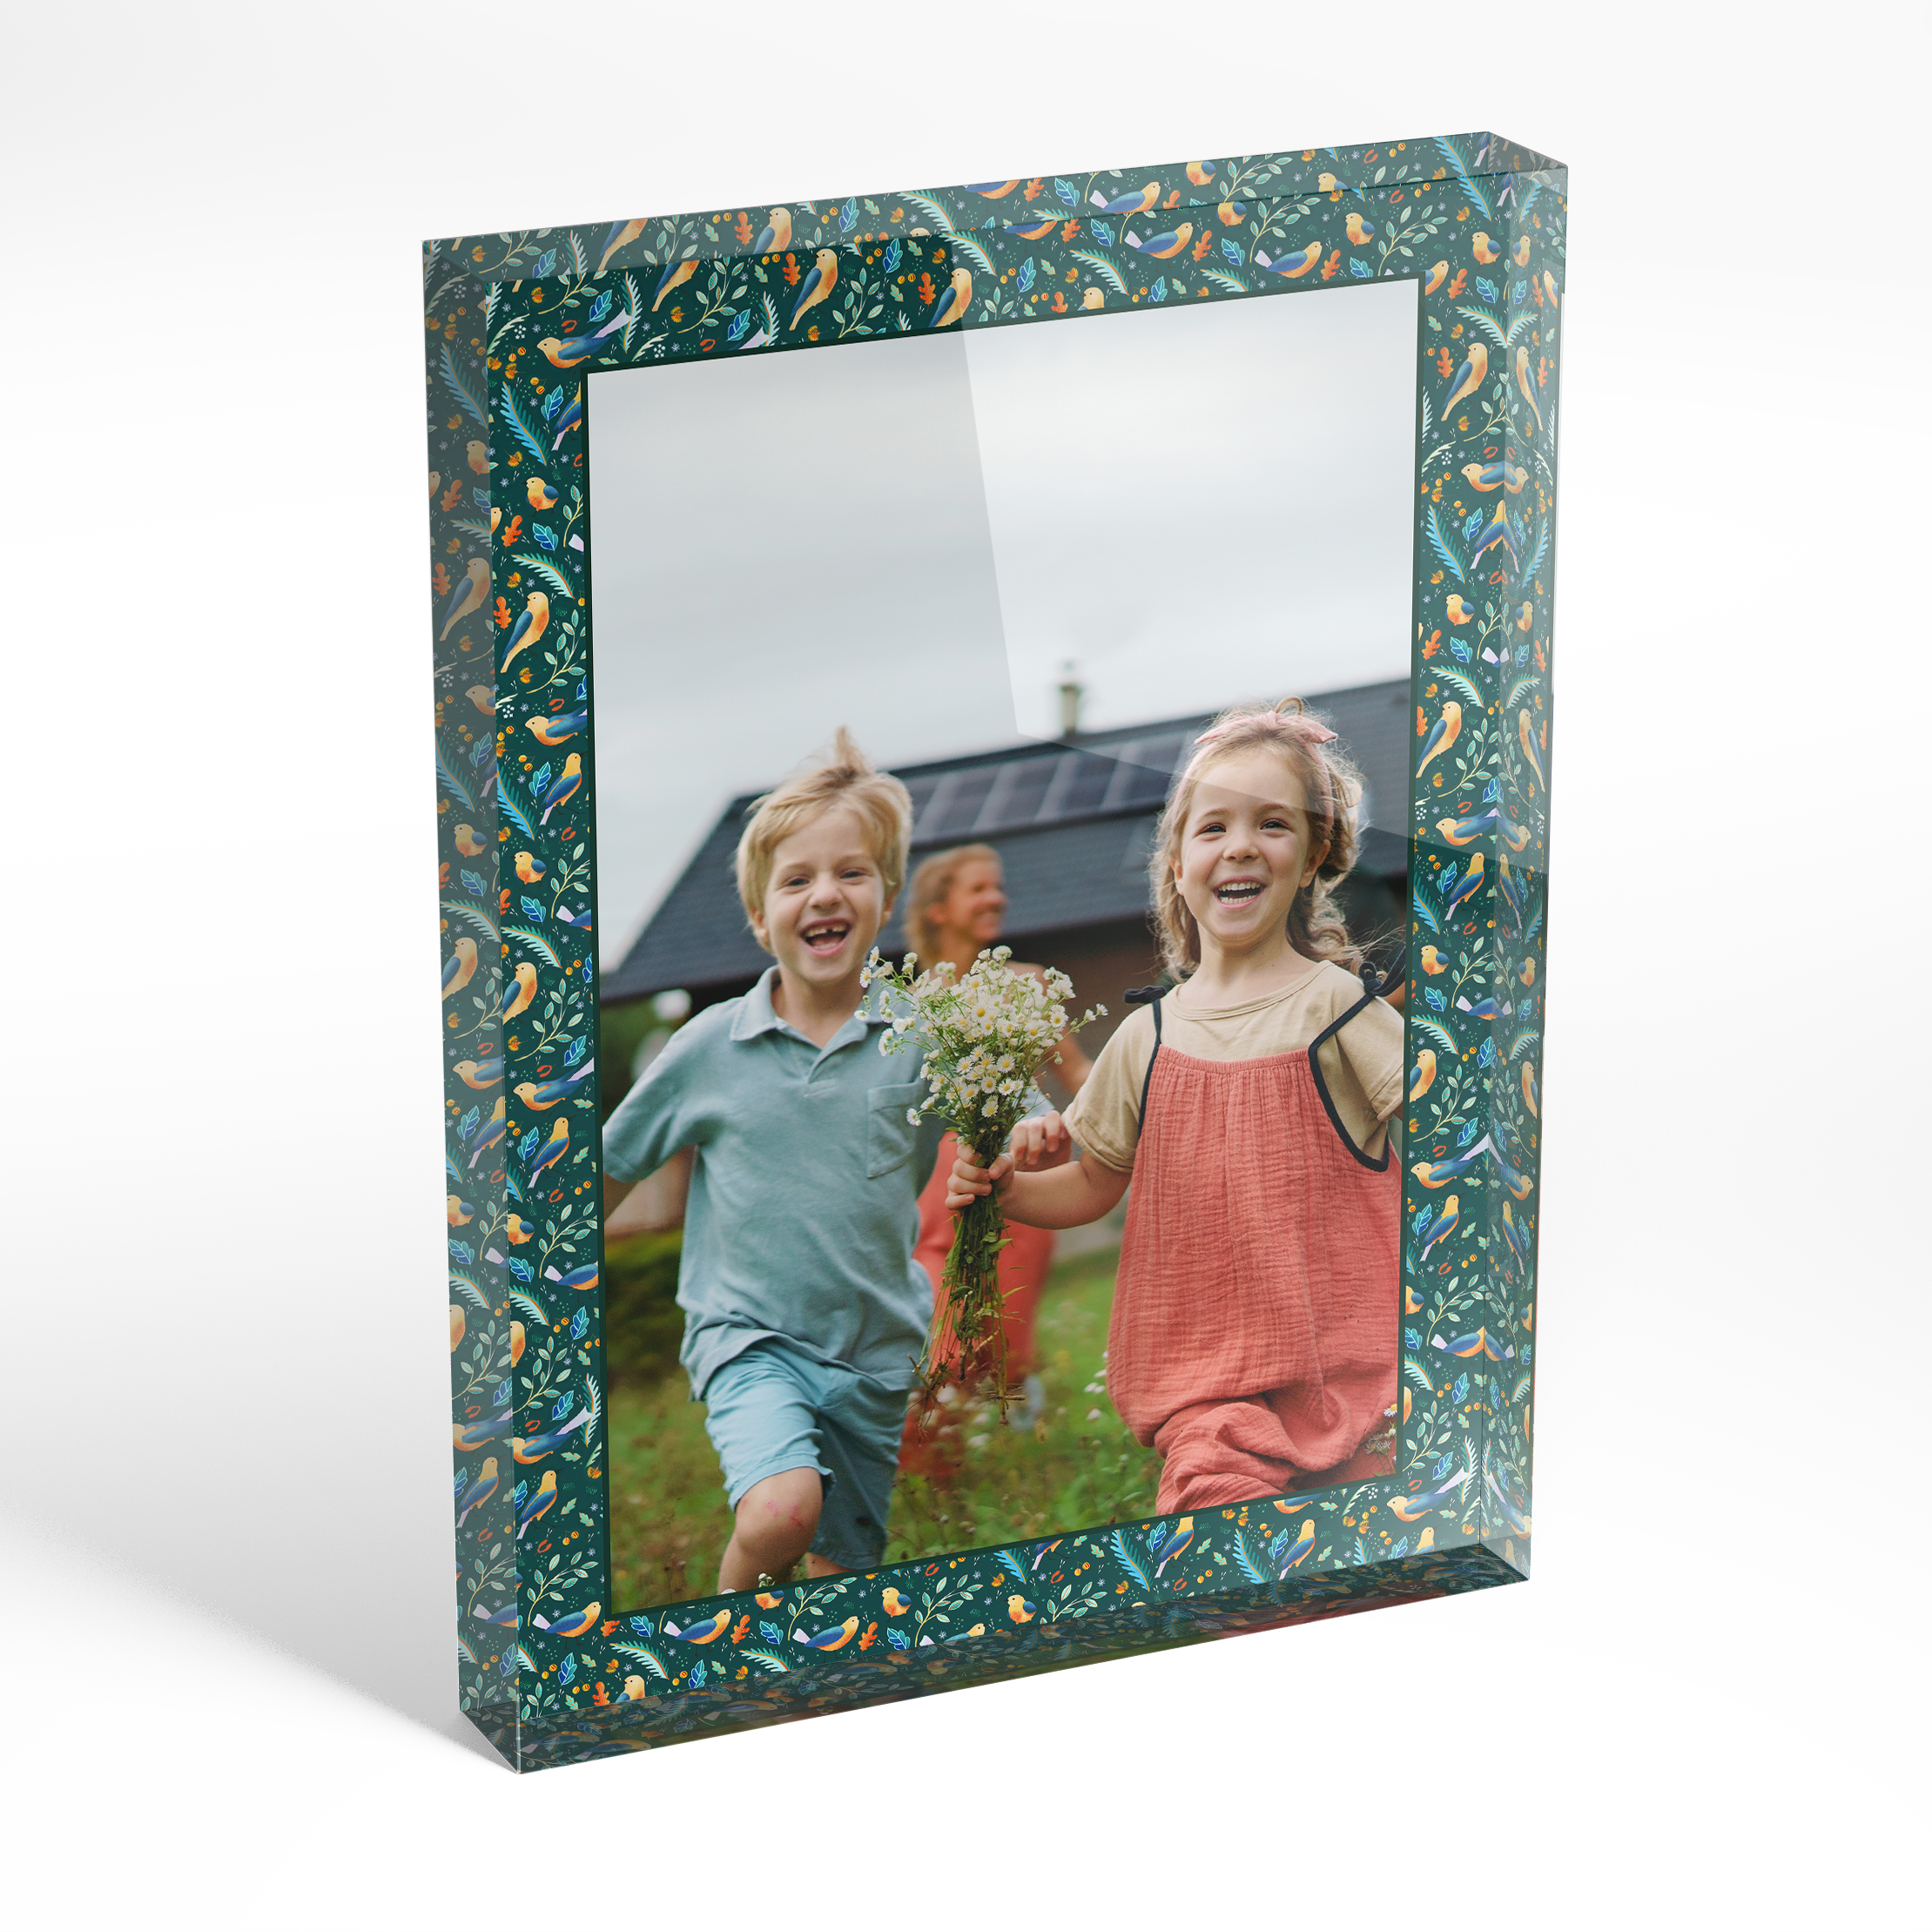 A front side view of a portrait layout Online acrylic photo blocks with space for 1 photo. Thiis design is named 'Heritage Portrait'. 